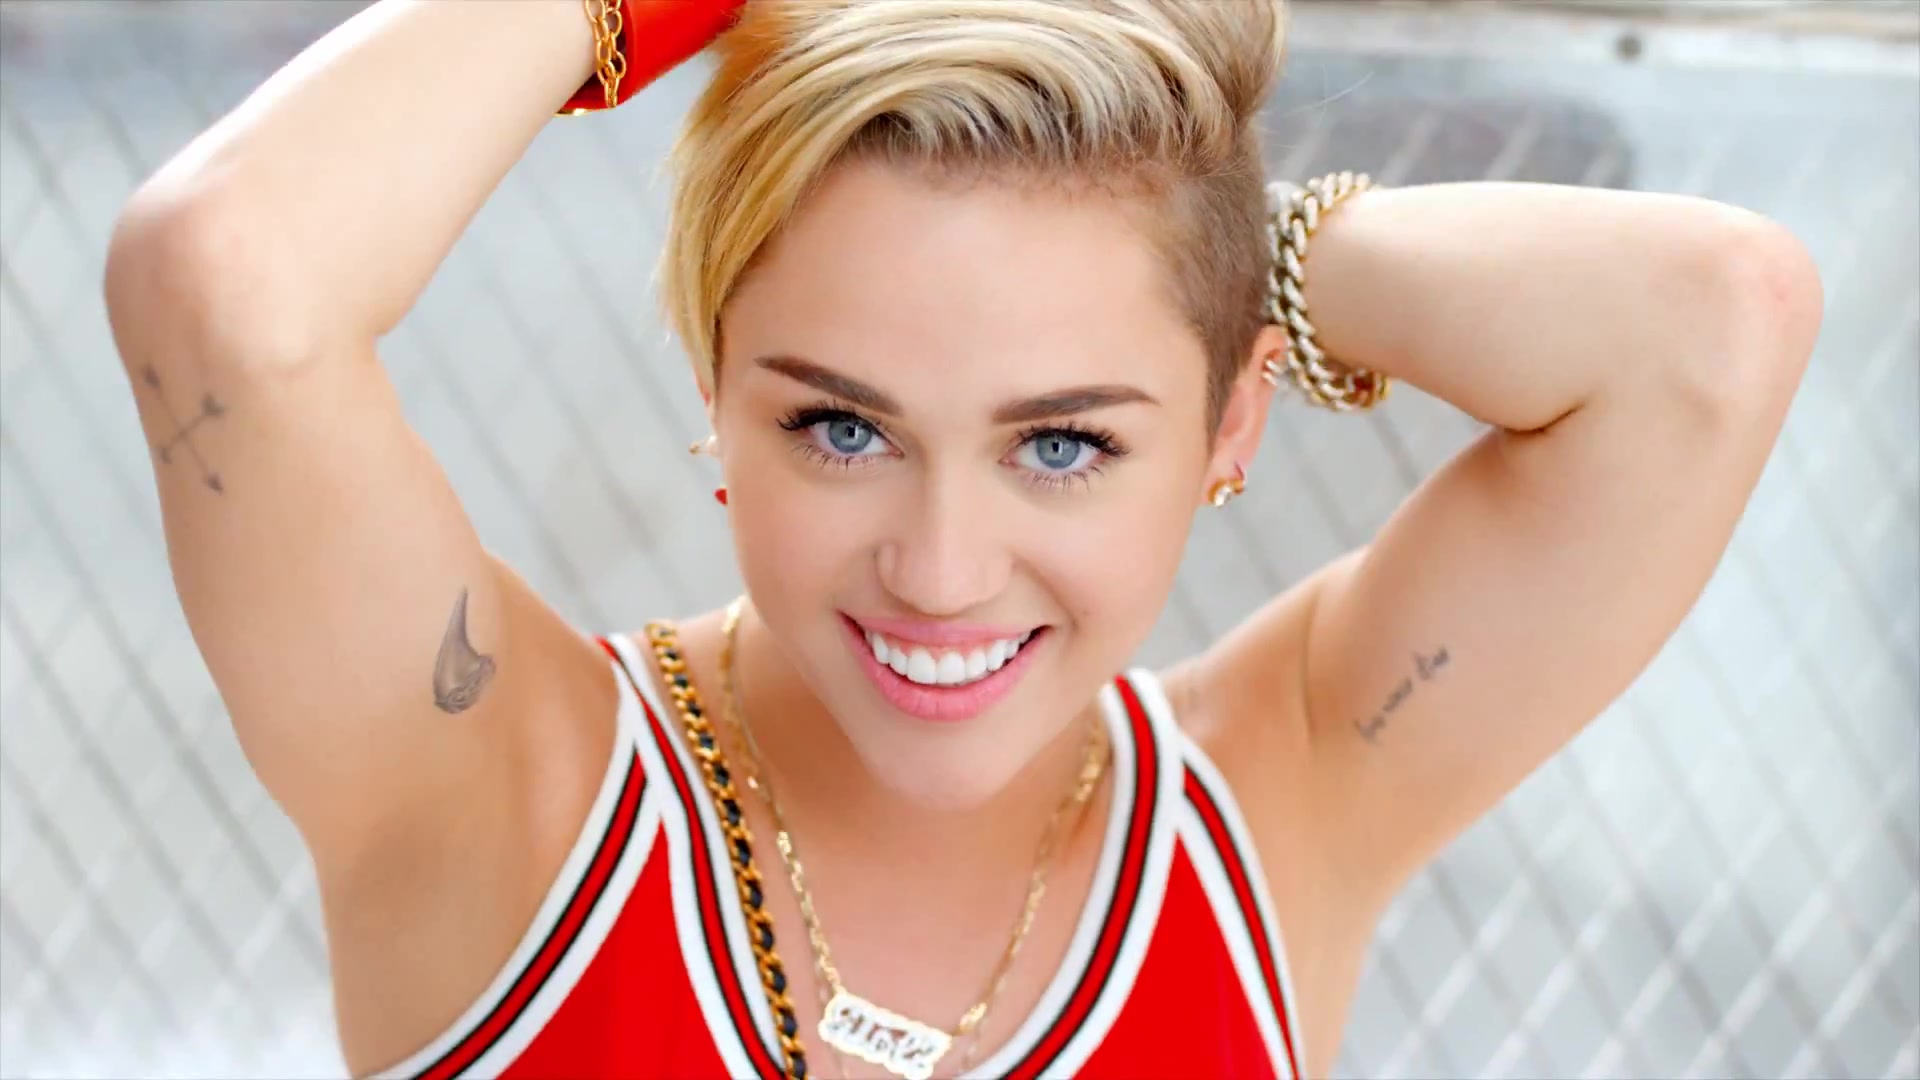 Miley Cyrus Wallpapers - Wallpaper, High Definition, High Quality